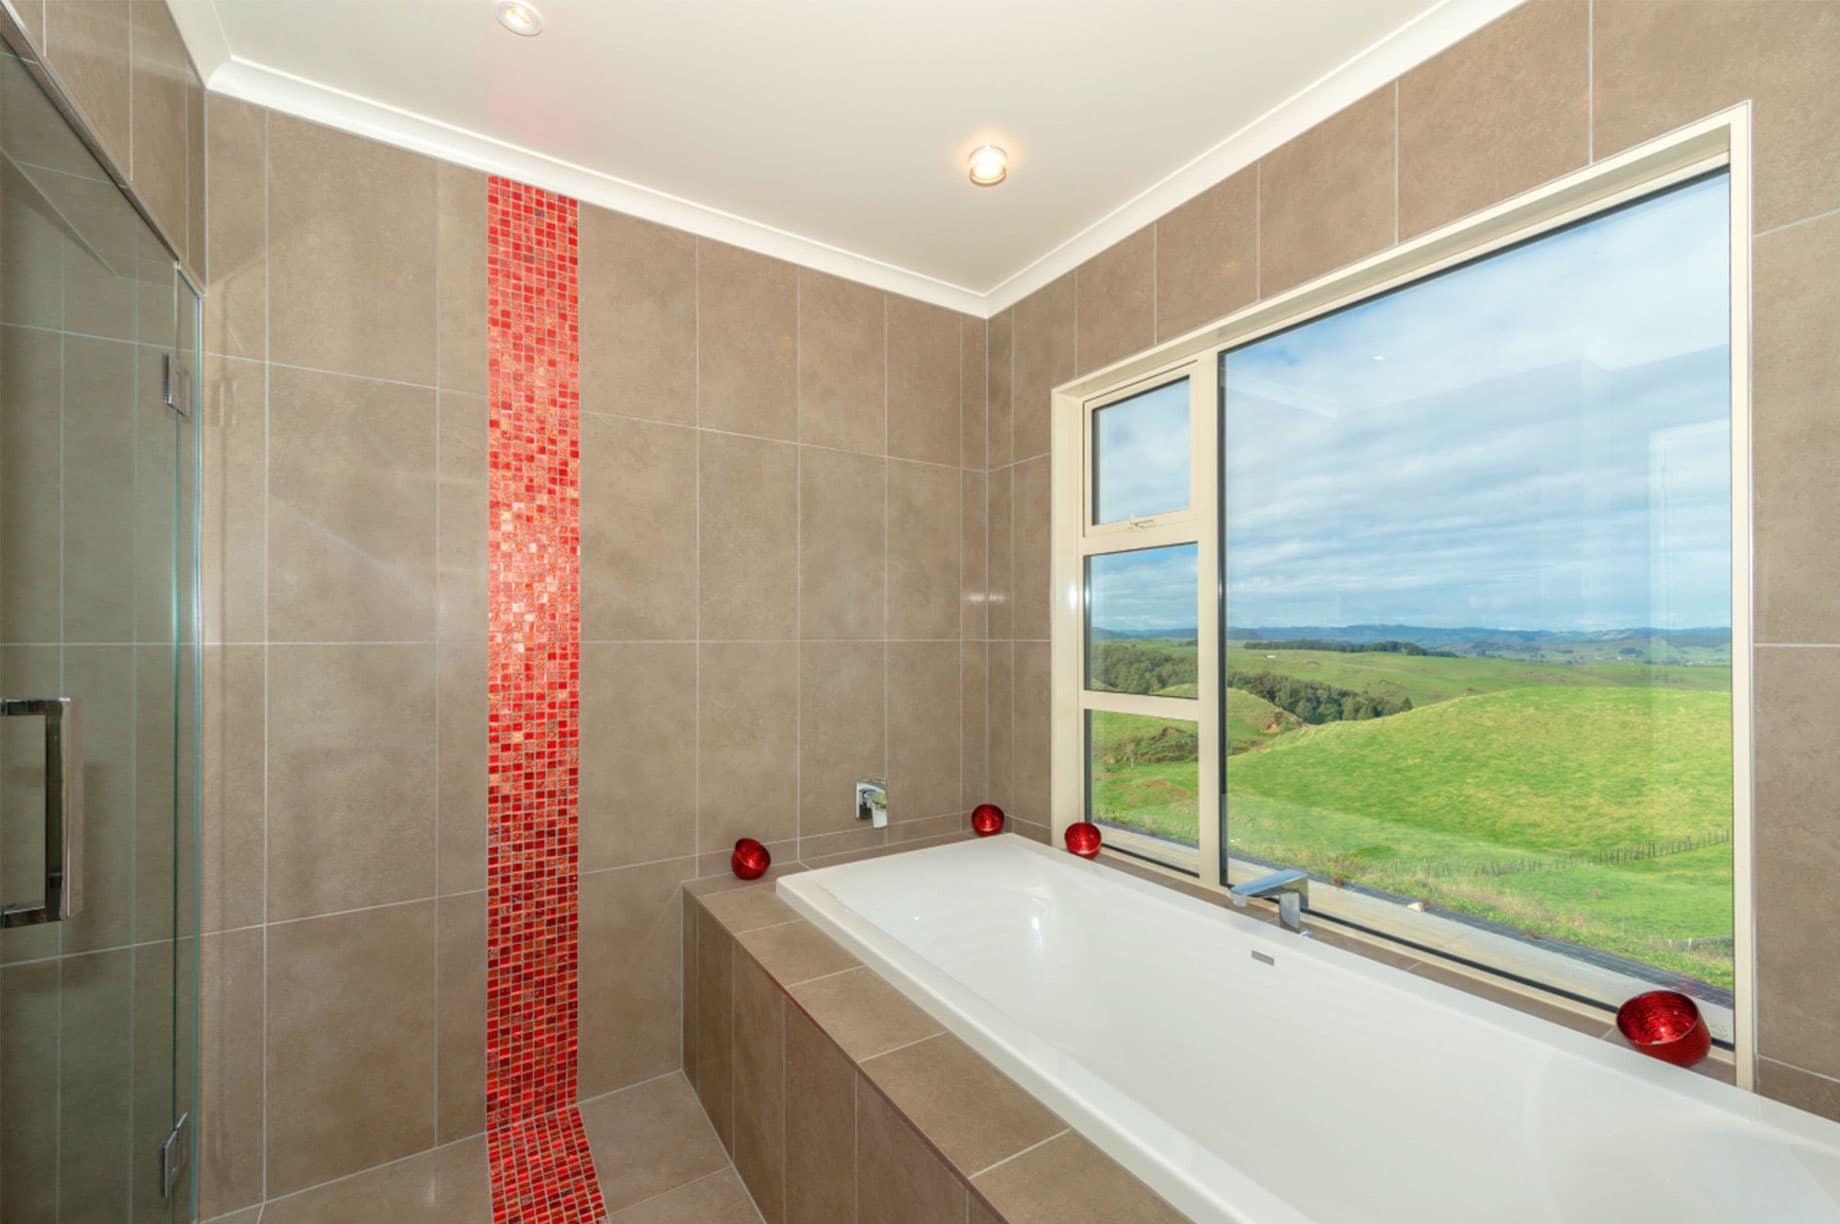 Bathroom with beige and red tiles